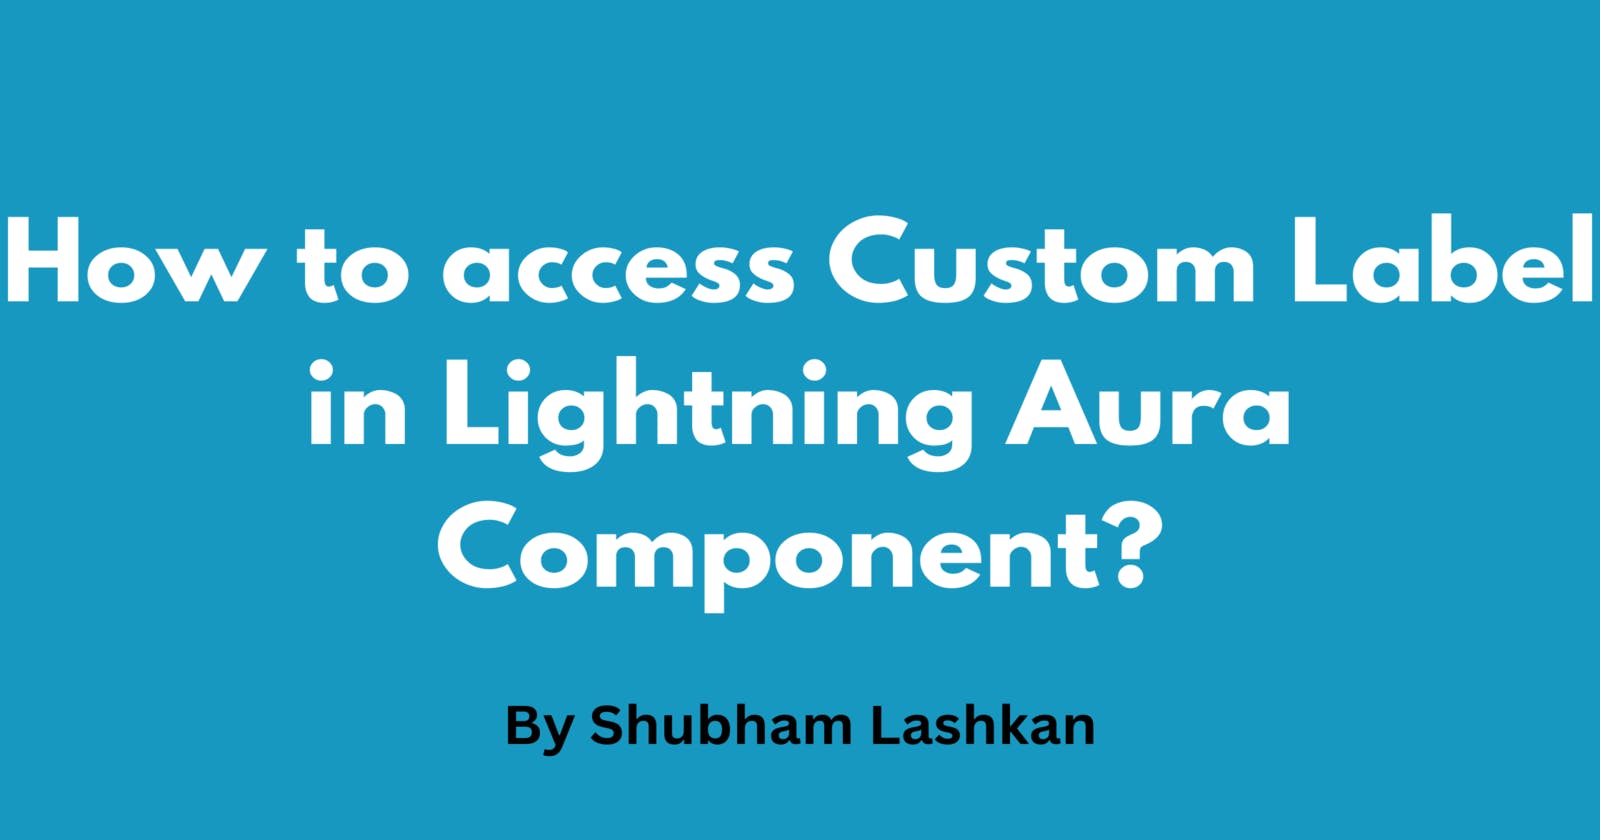 How to access Custom Label in Lightning Aura Component?